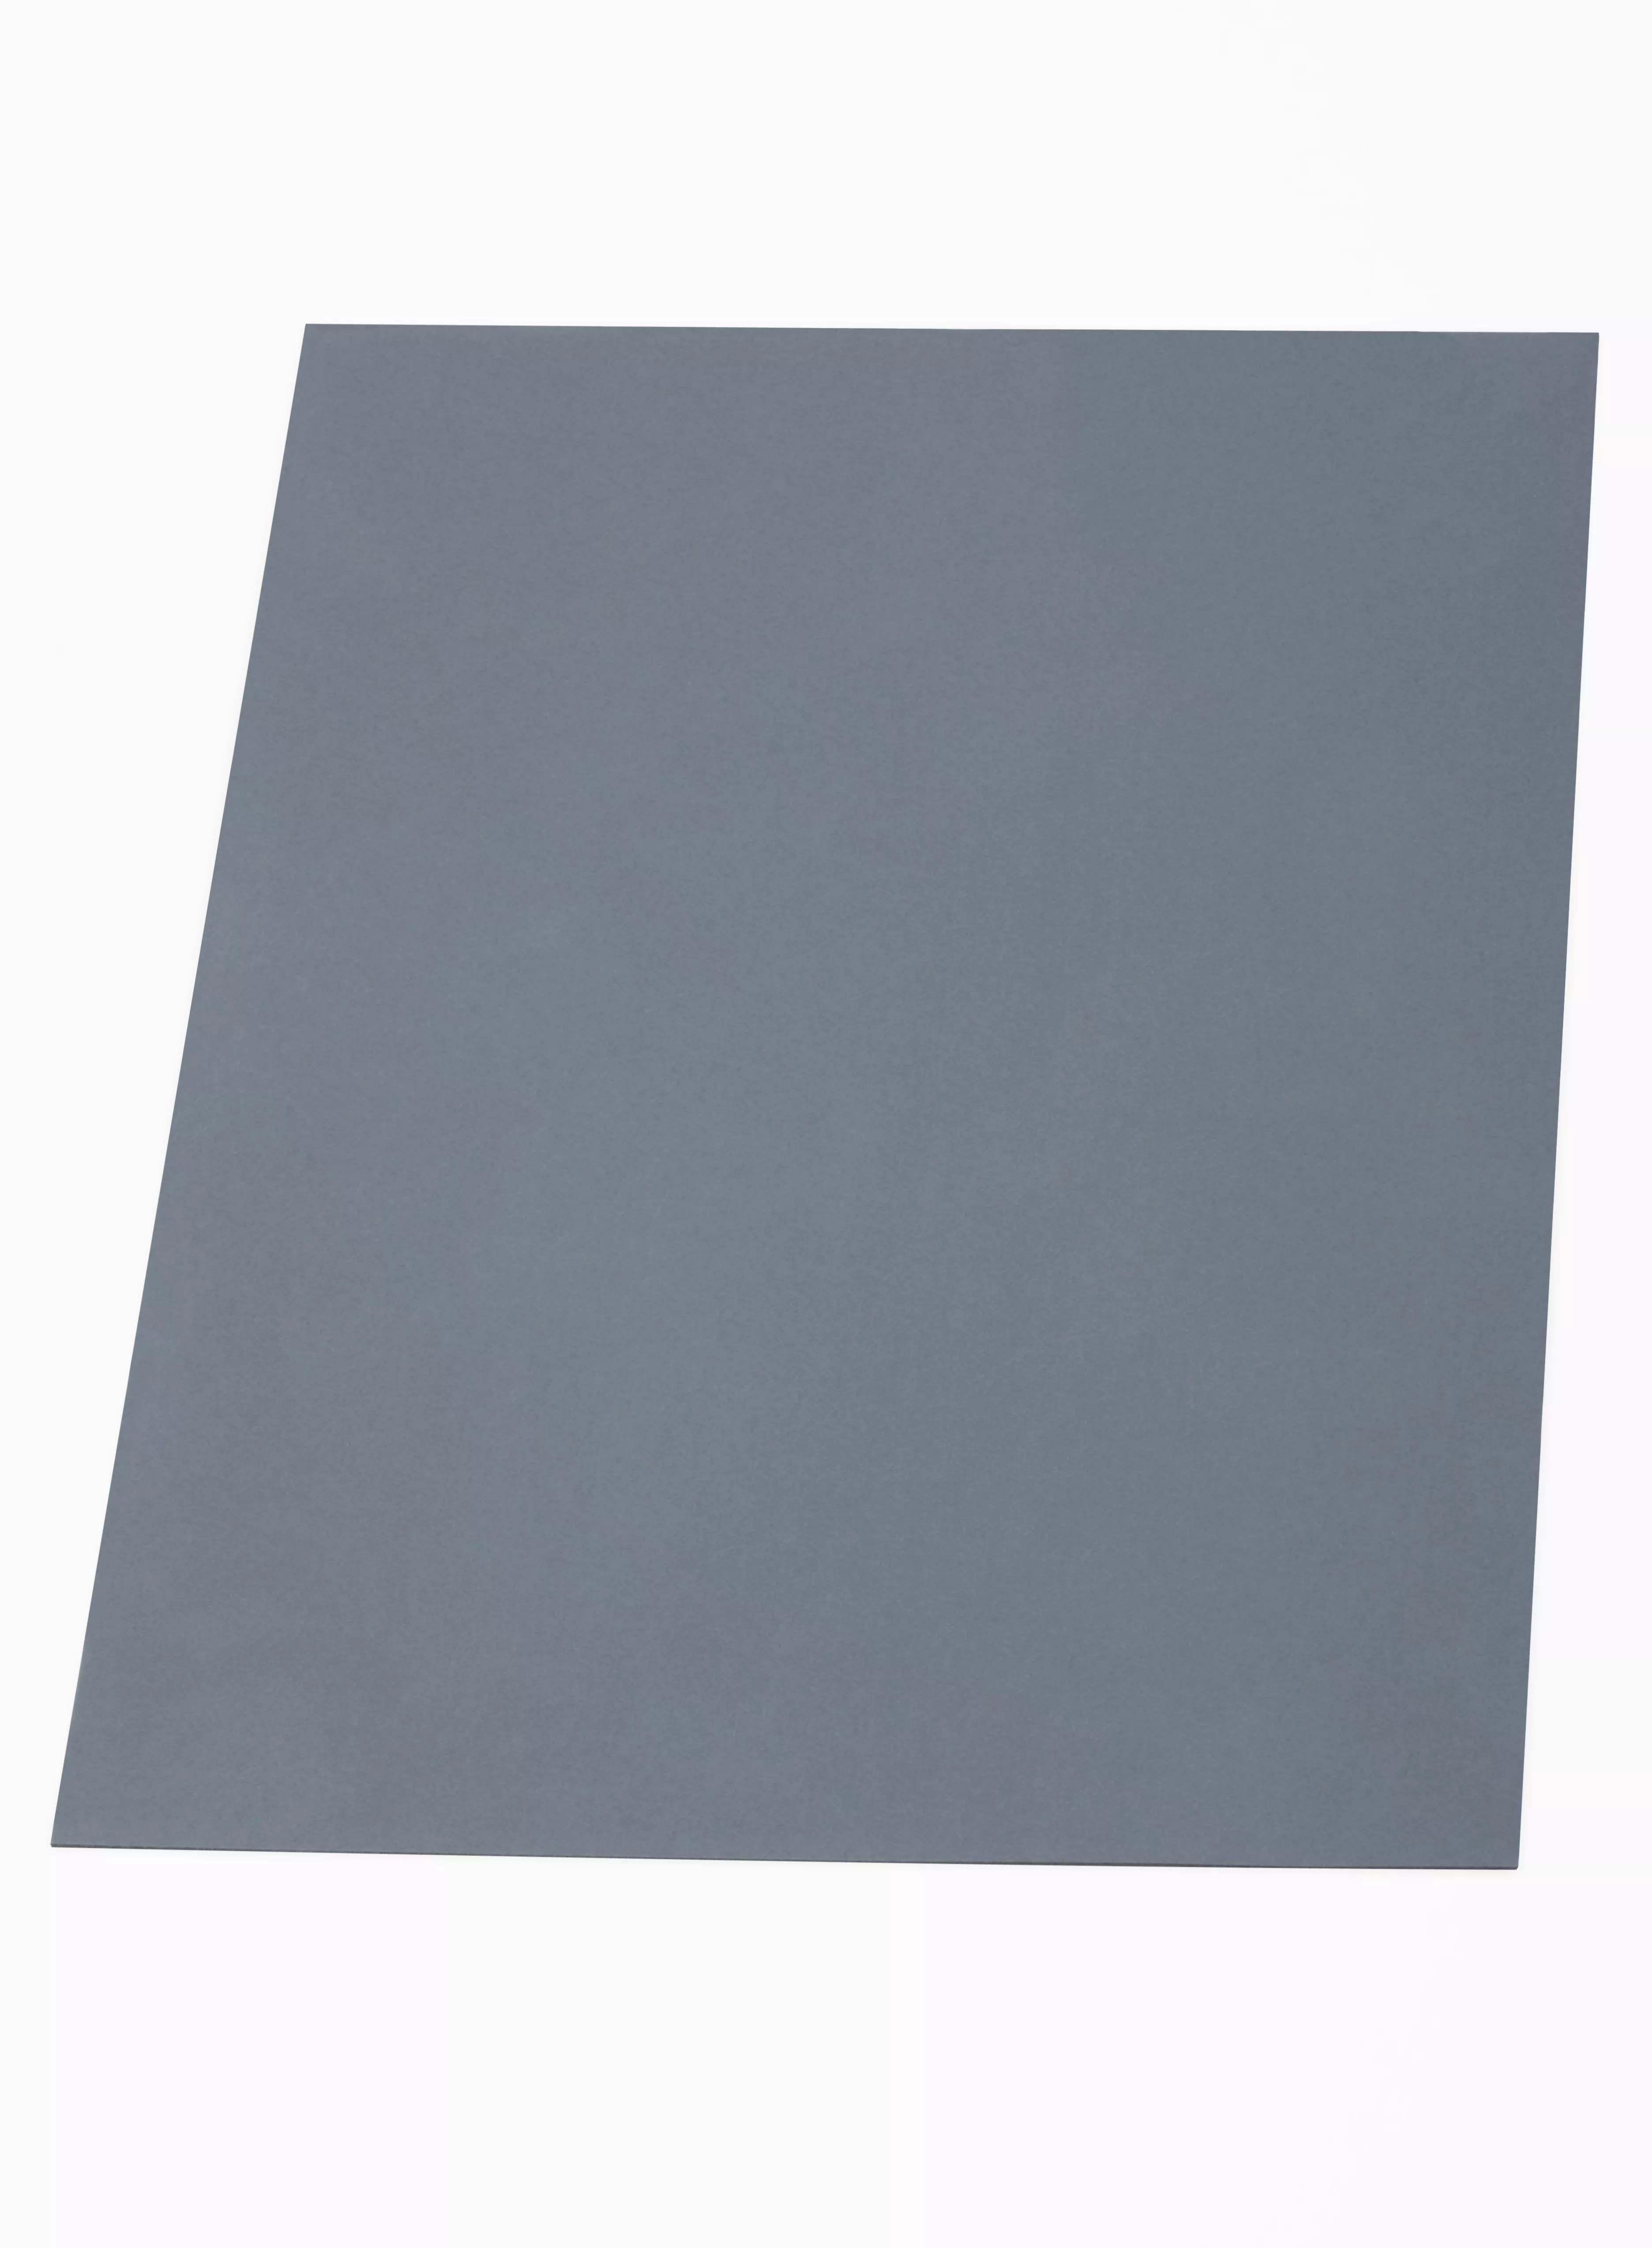 SKU 7010405249 | 3M™ Thermally Conductive Silicone Interface Pad 5549S